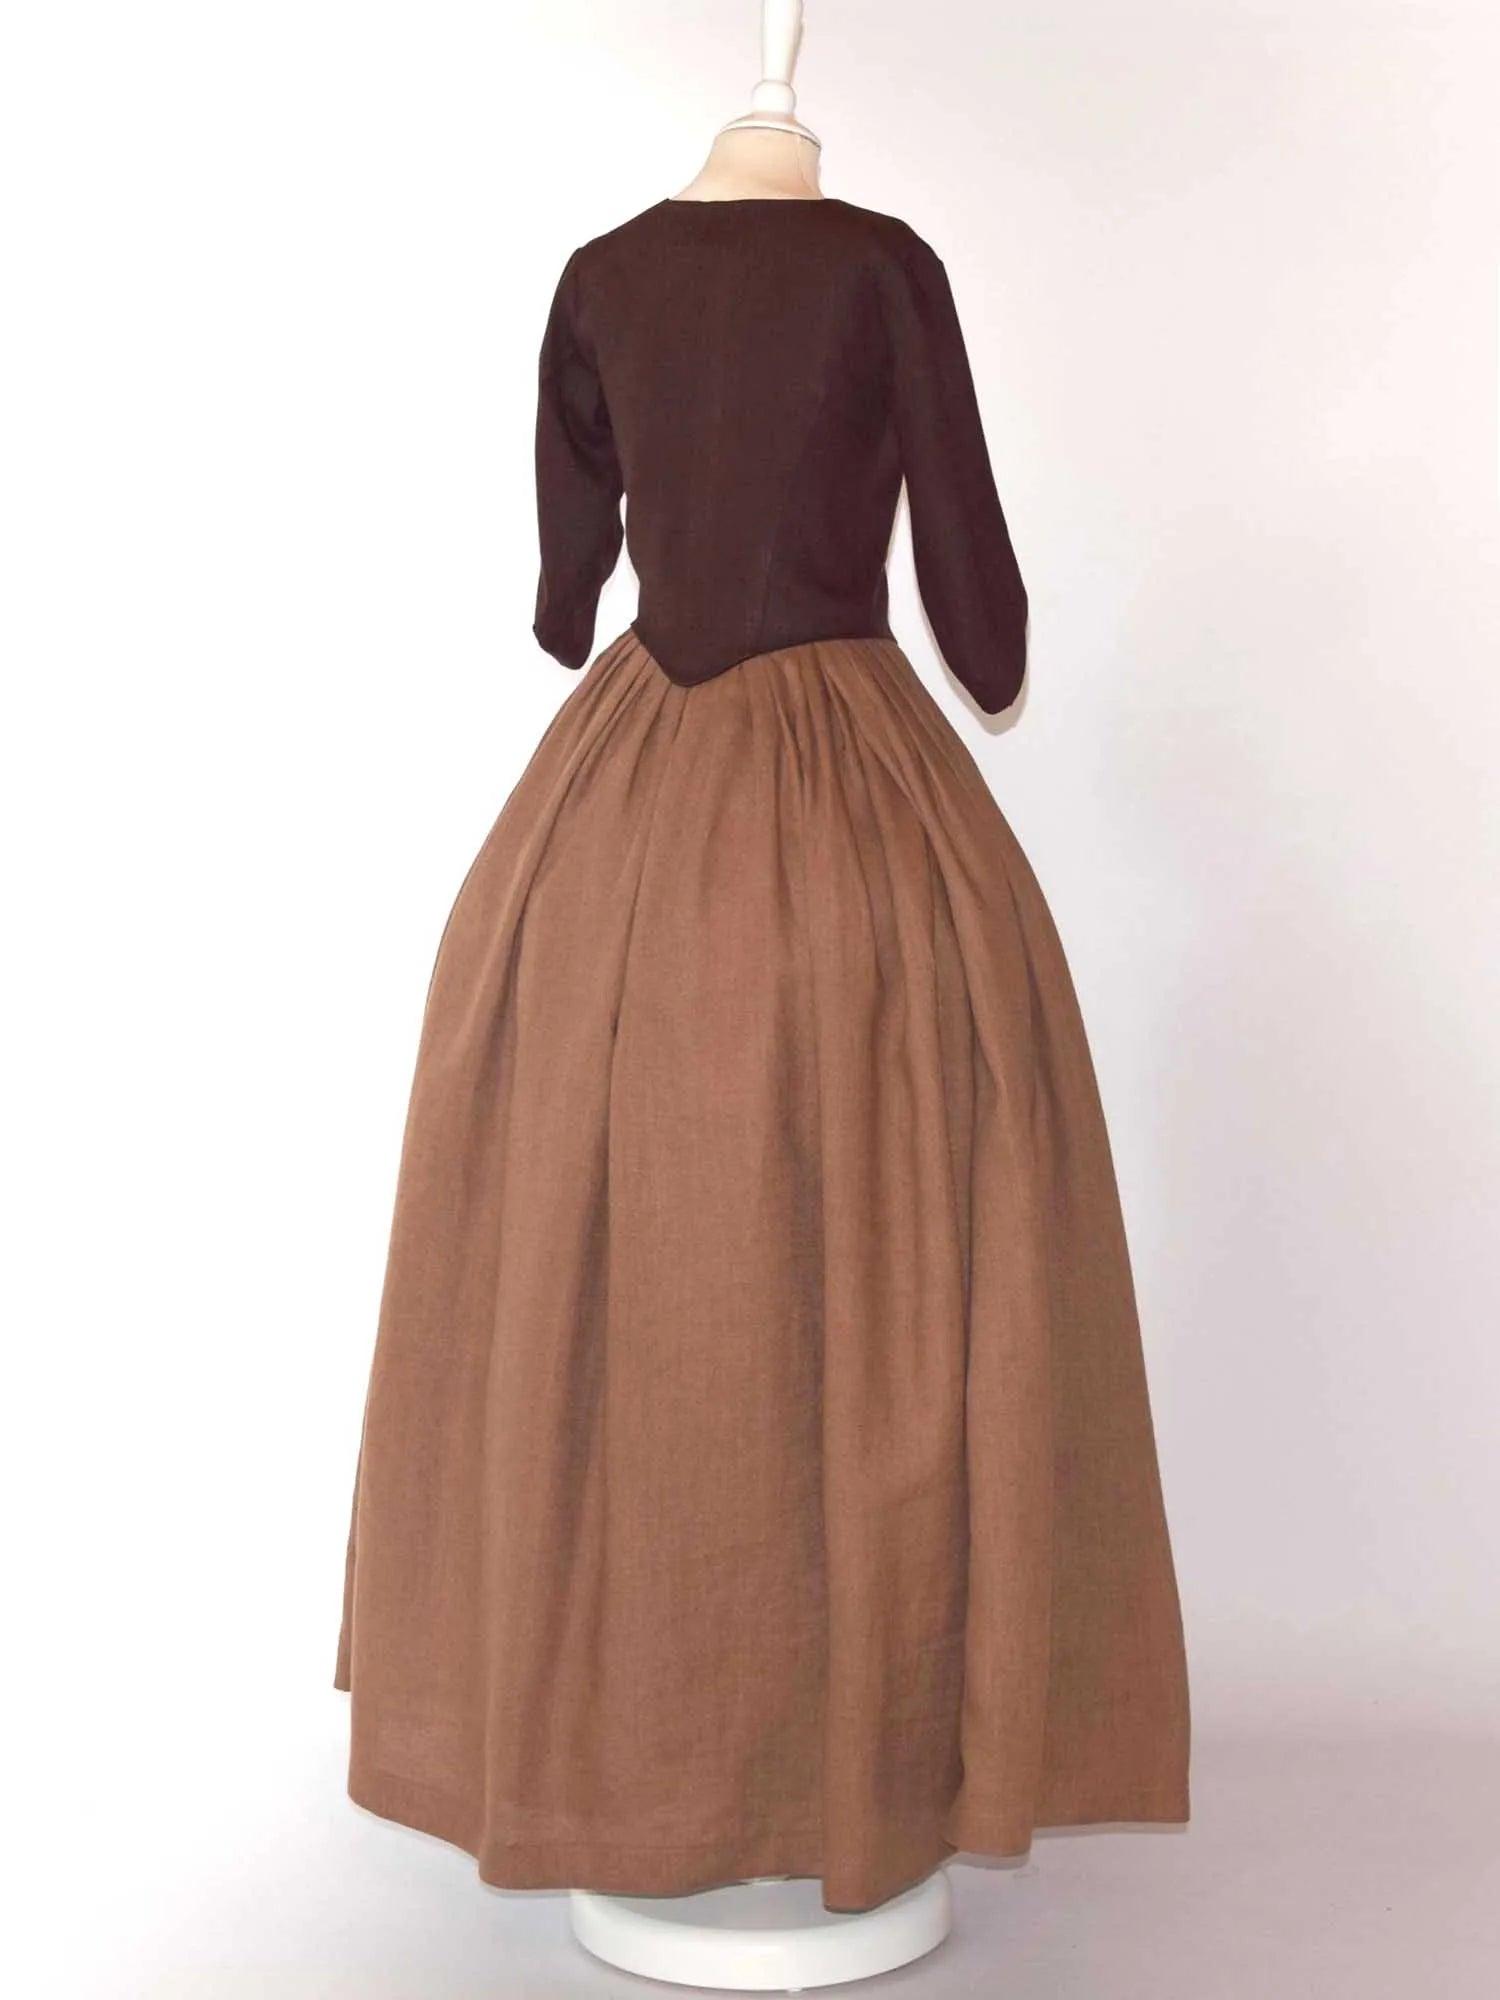 Historical Costume in Chocolate &amp; Toffee Linen - Atelier Serraspina